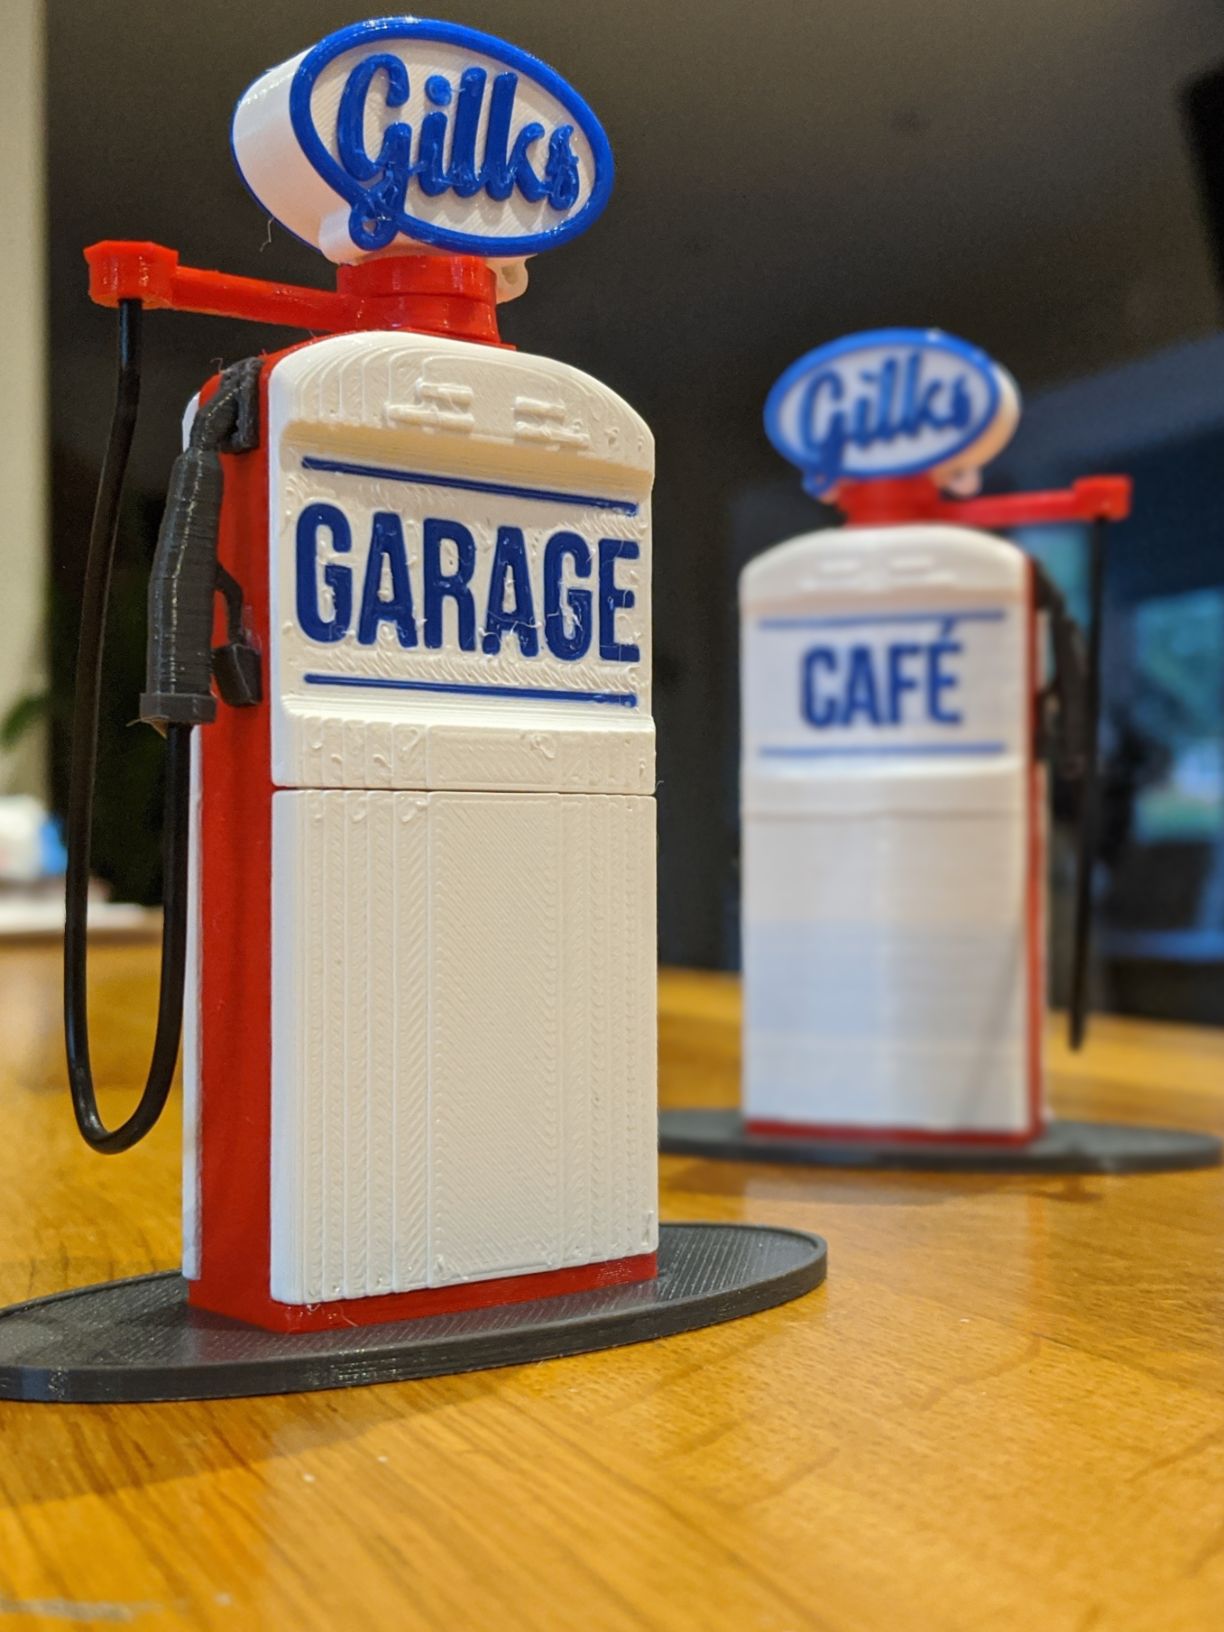 The final model, located now in Gilks' Garage Cafe, Kineton